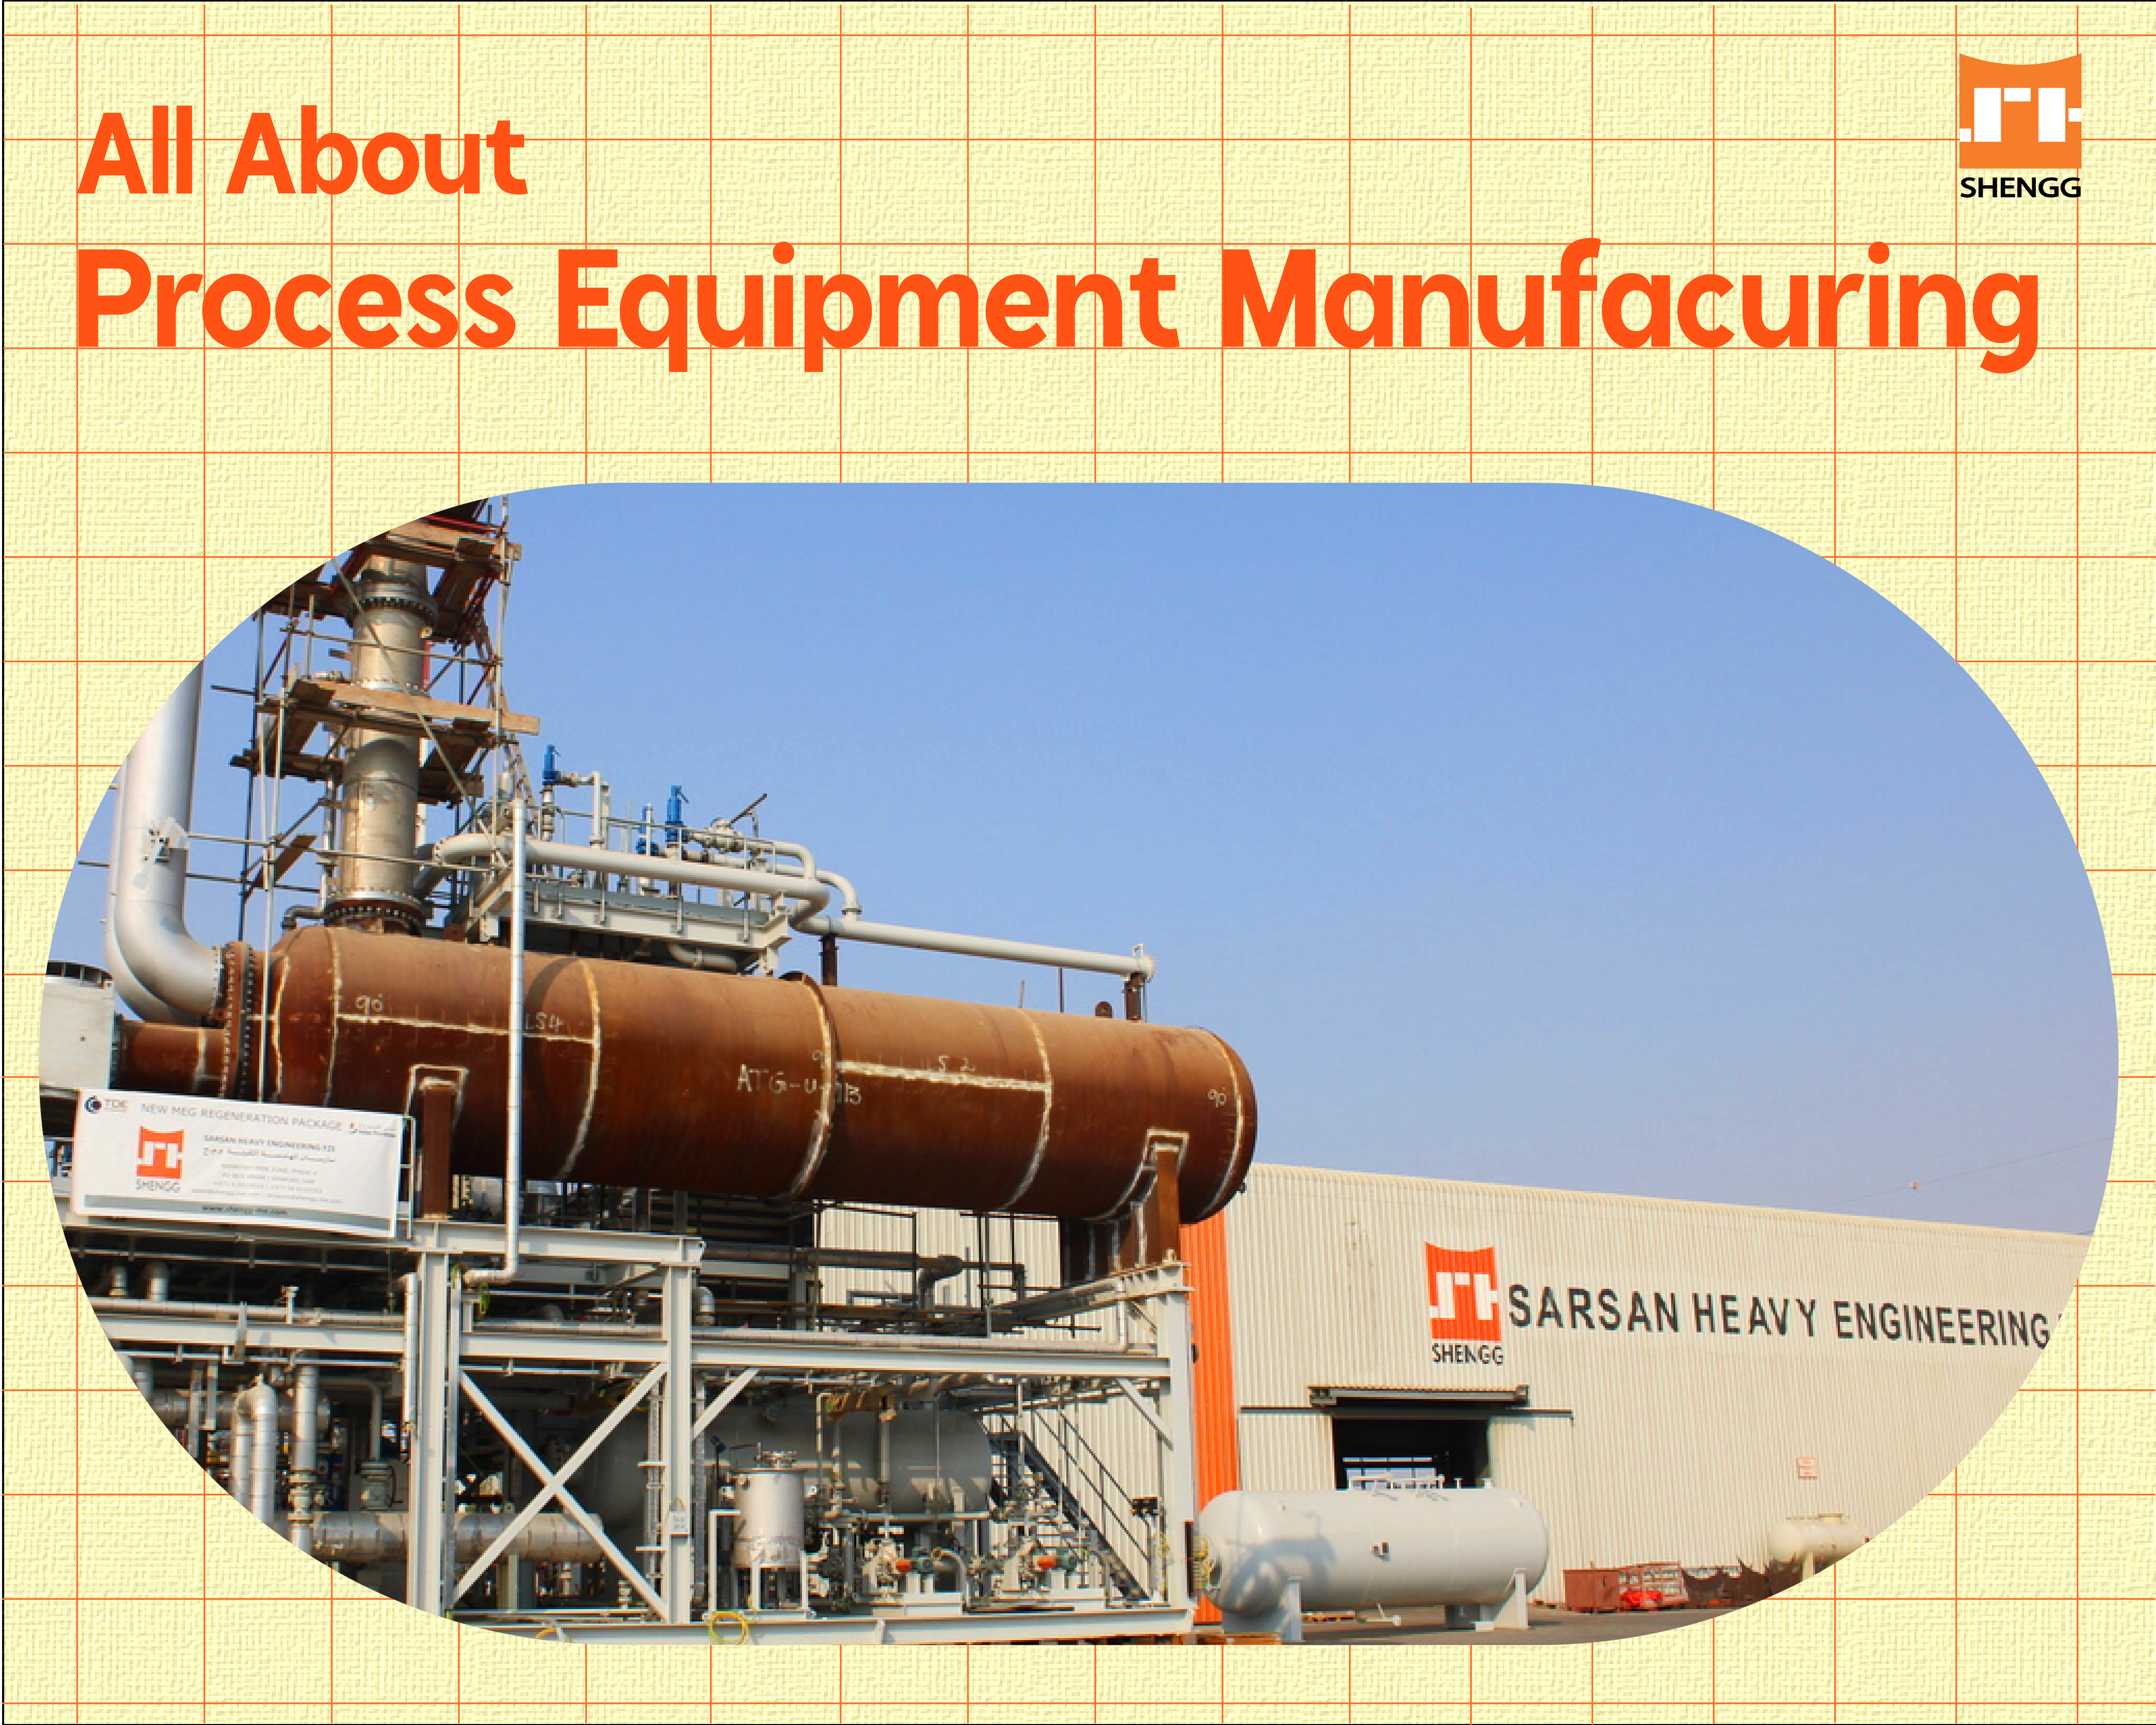 All About: Process Equipment Manufacturing